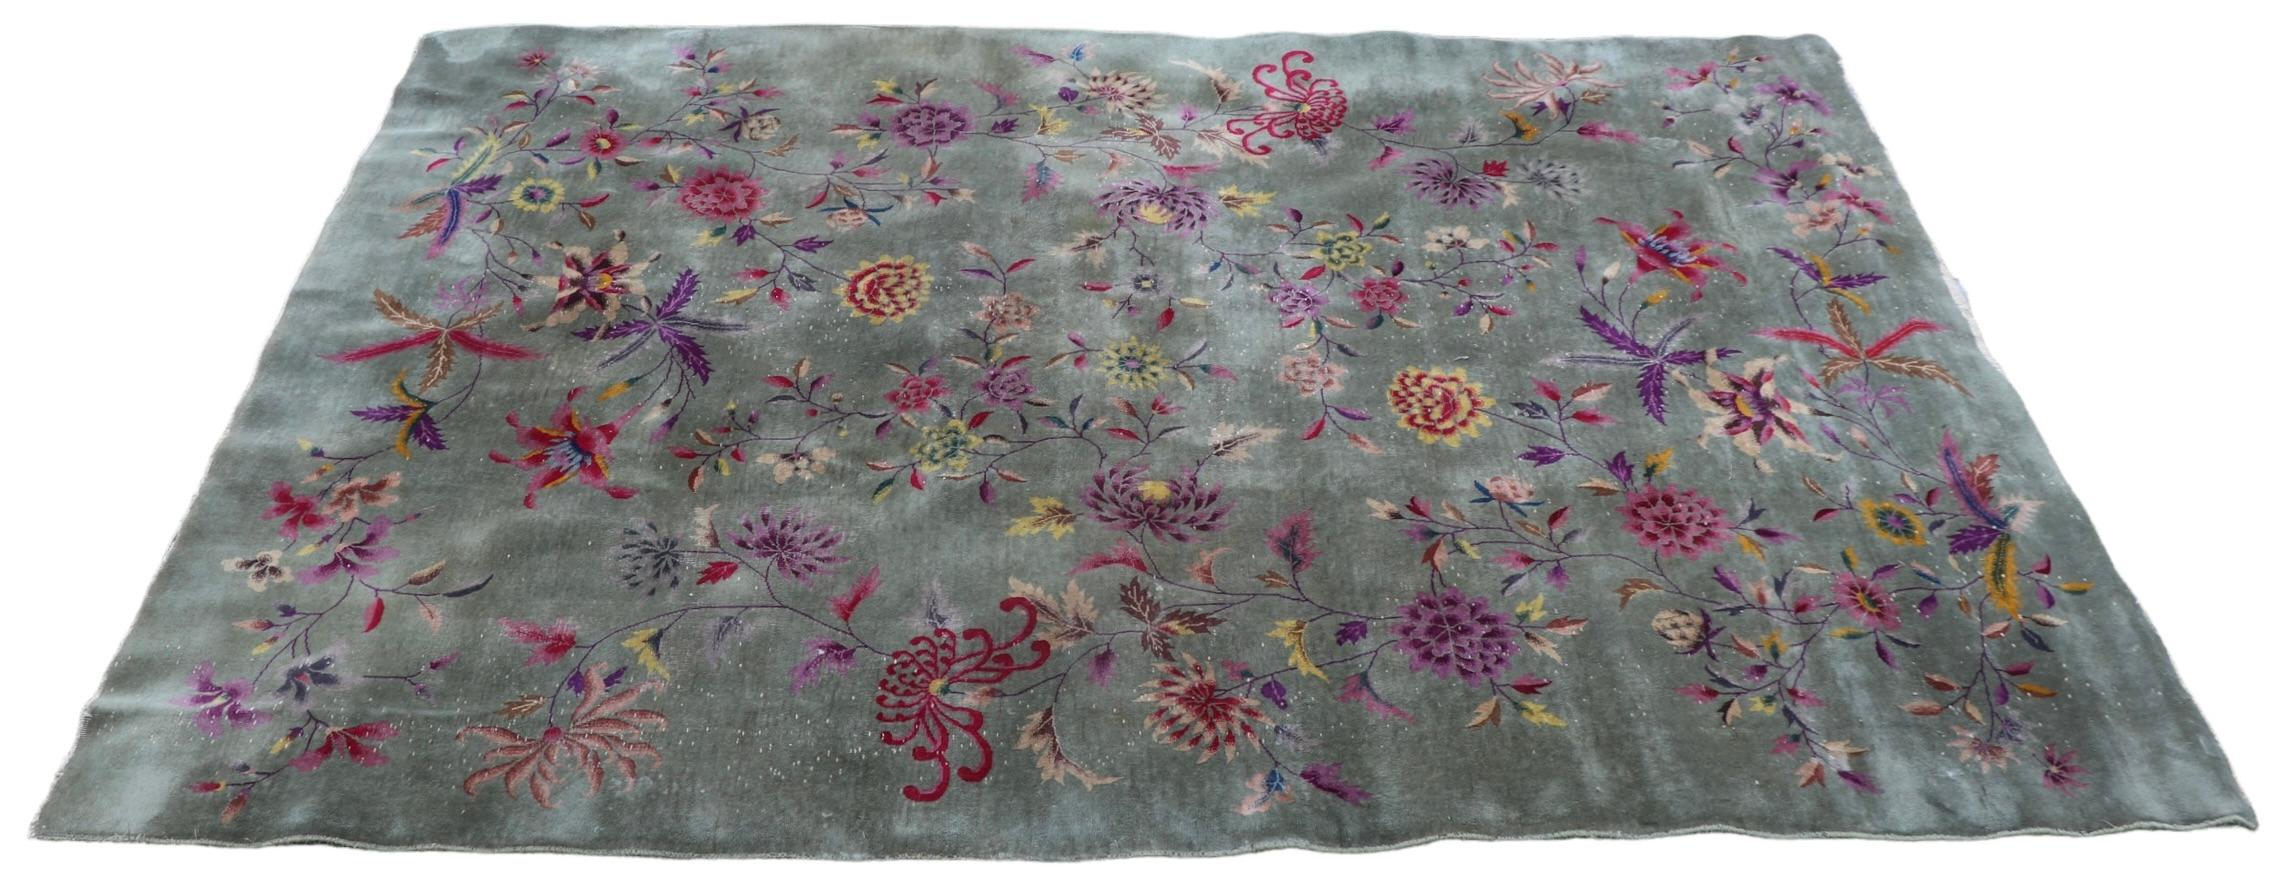 Wool Art Deco Chinese Rug with Floral Motif c. 1920/1930's For Sale